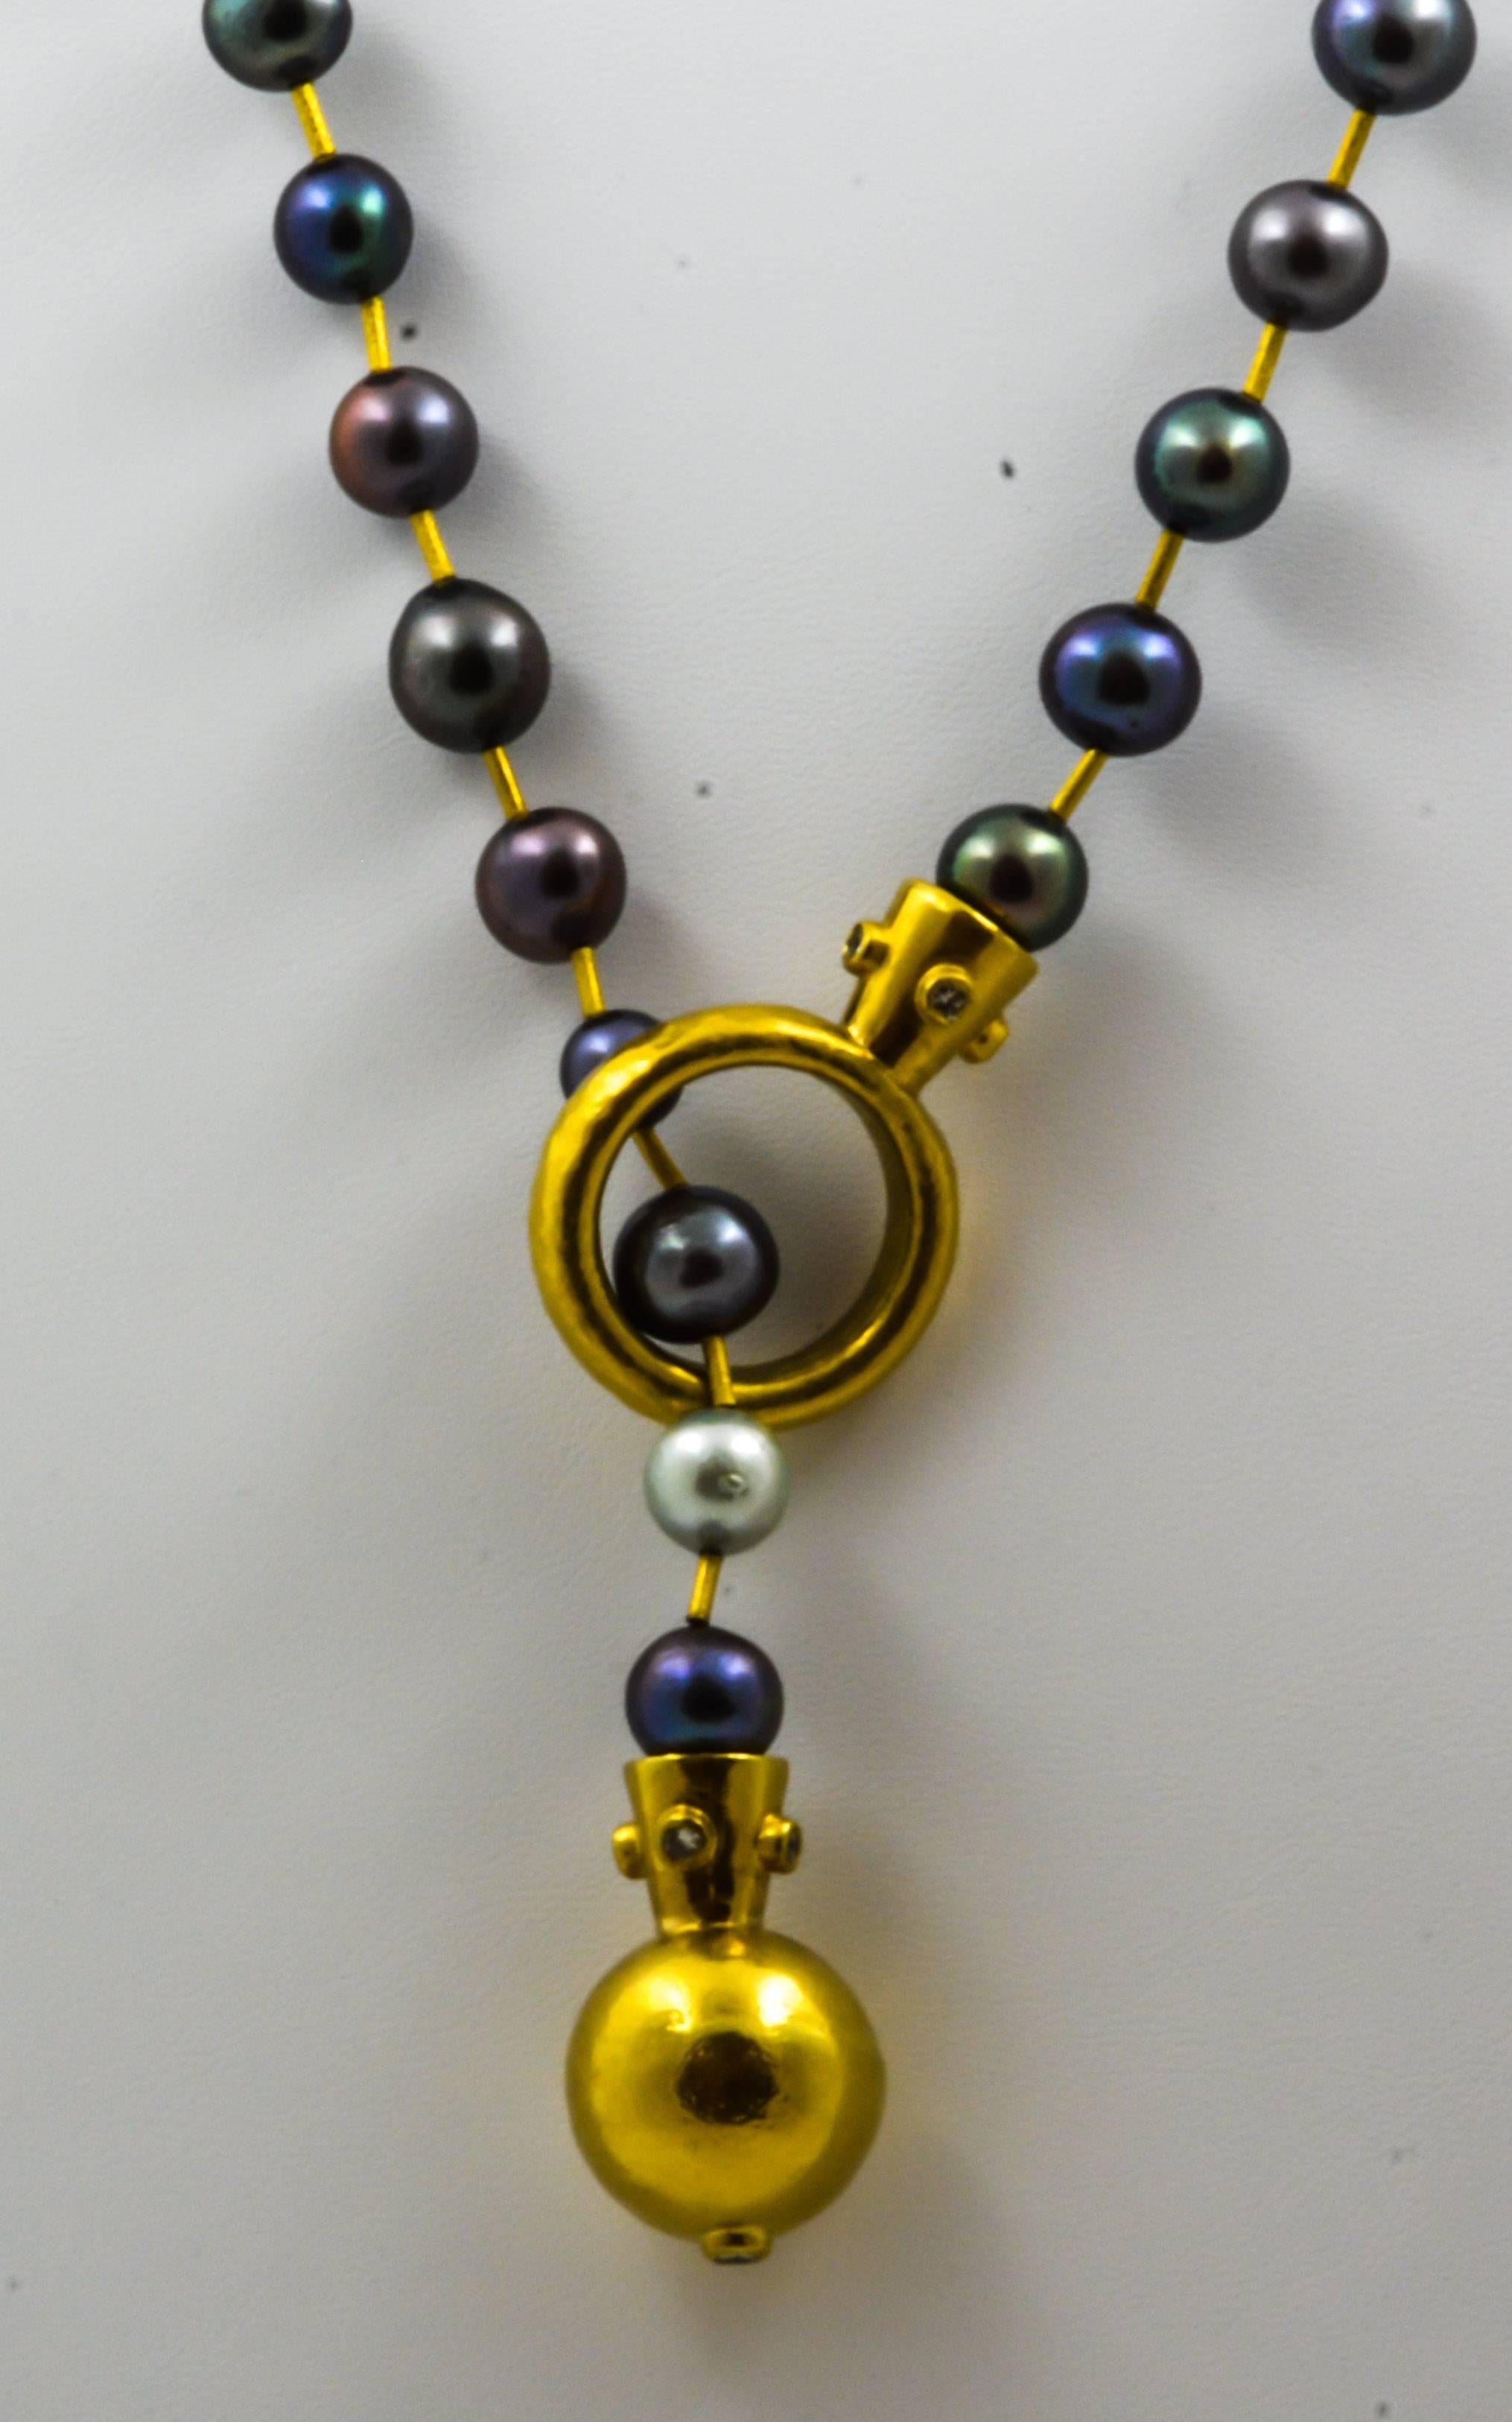 Varied pastel black pearls are strung with 22kt yellow gold, textured, tube beads in this extraordinary necklace. Featuring a Lariat style circle with a 22kt gold ball and diamond end as the clasping mechanism, the necklace is set with nine round,